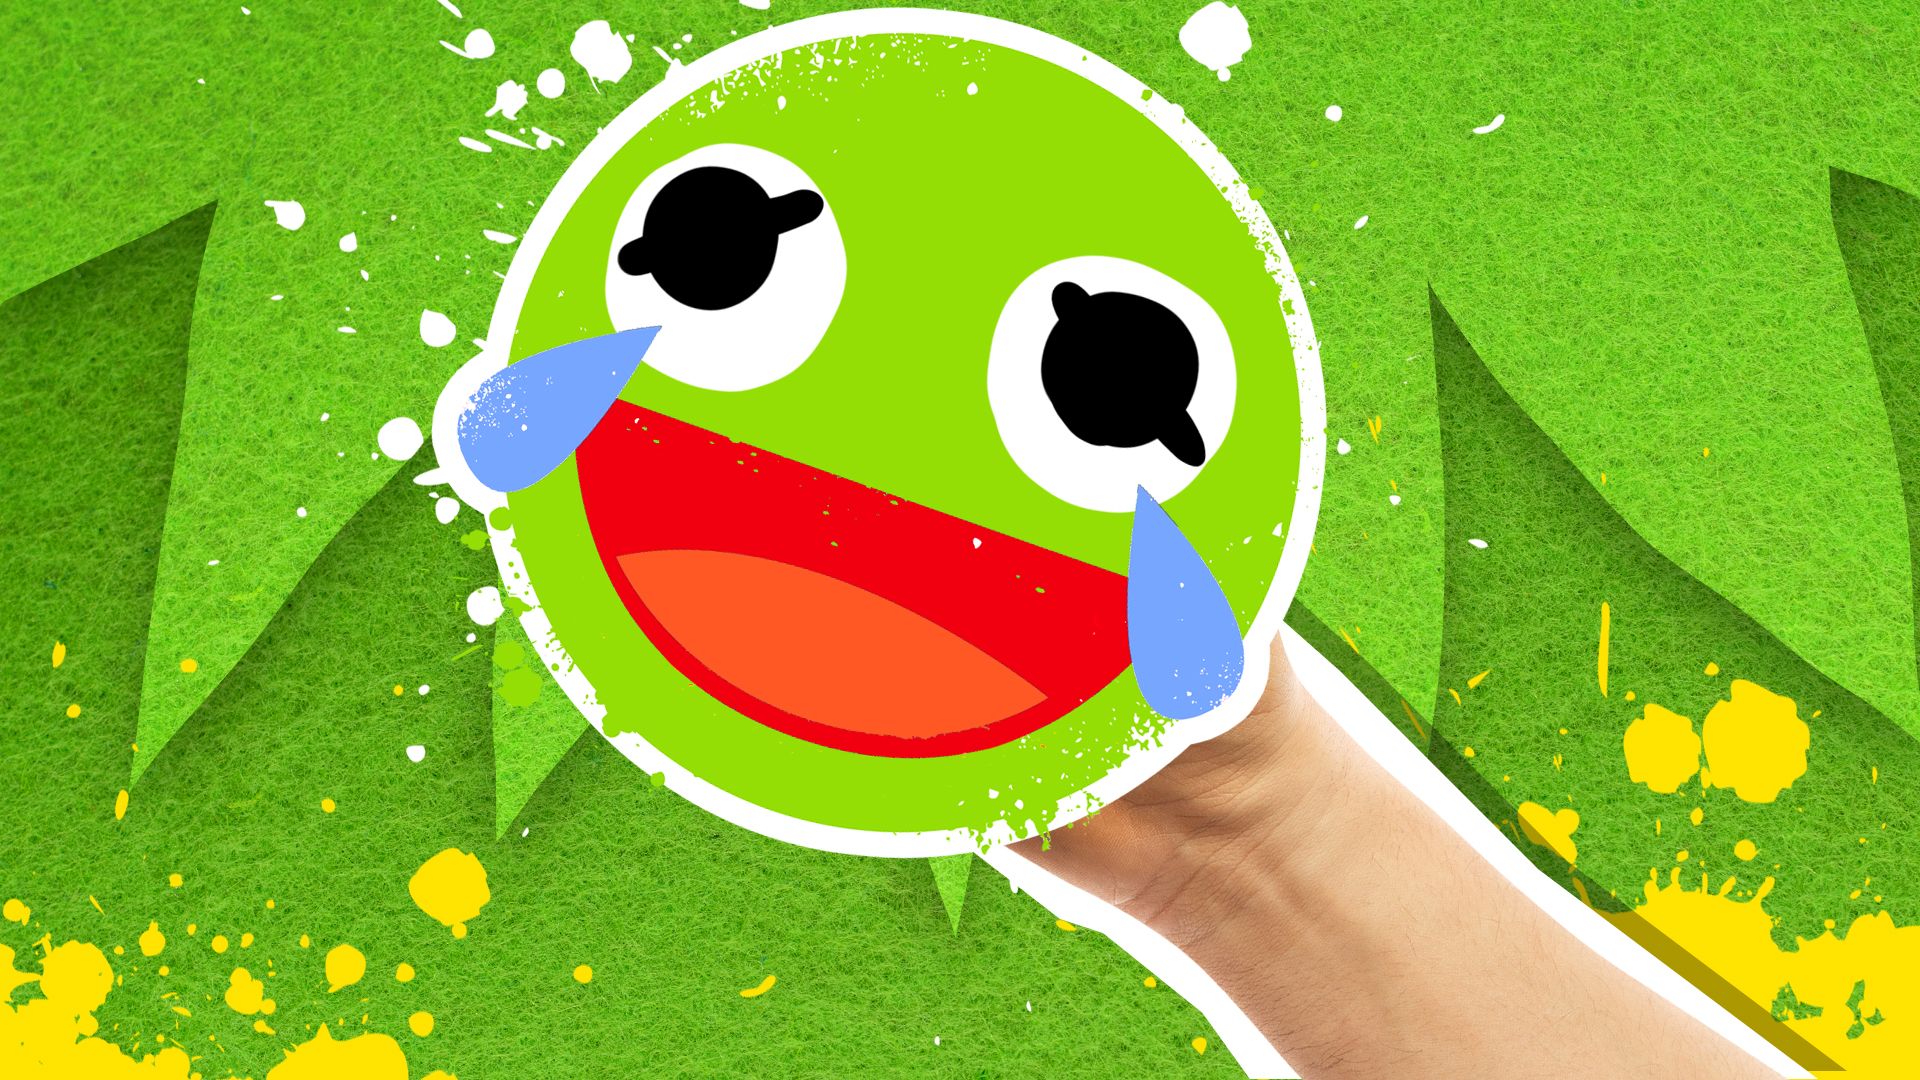 A laughing green faced emoji